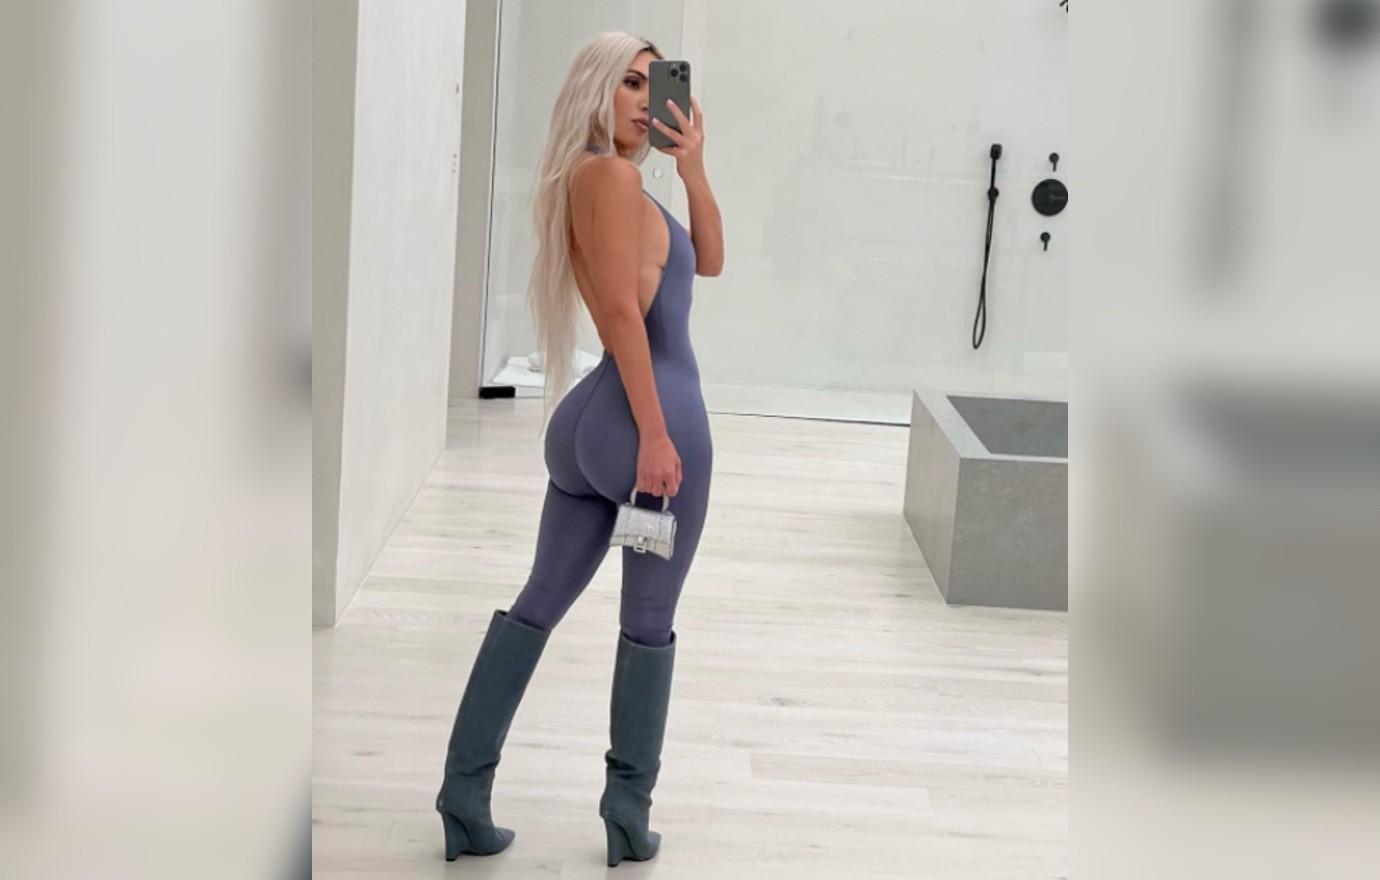 Kim Kardashian opens up about her 'cellulite' as she shows off fit figure  in nude Skims bodysuit for new video